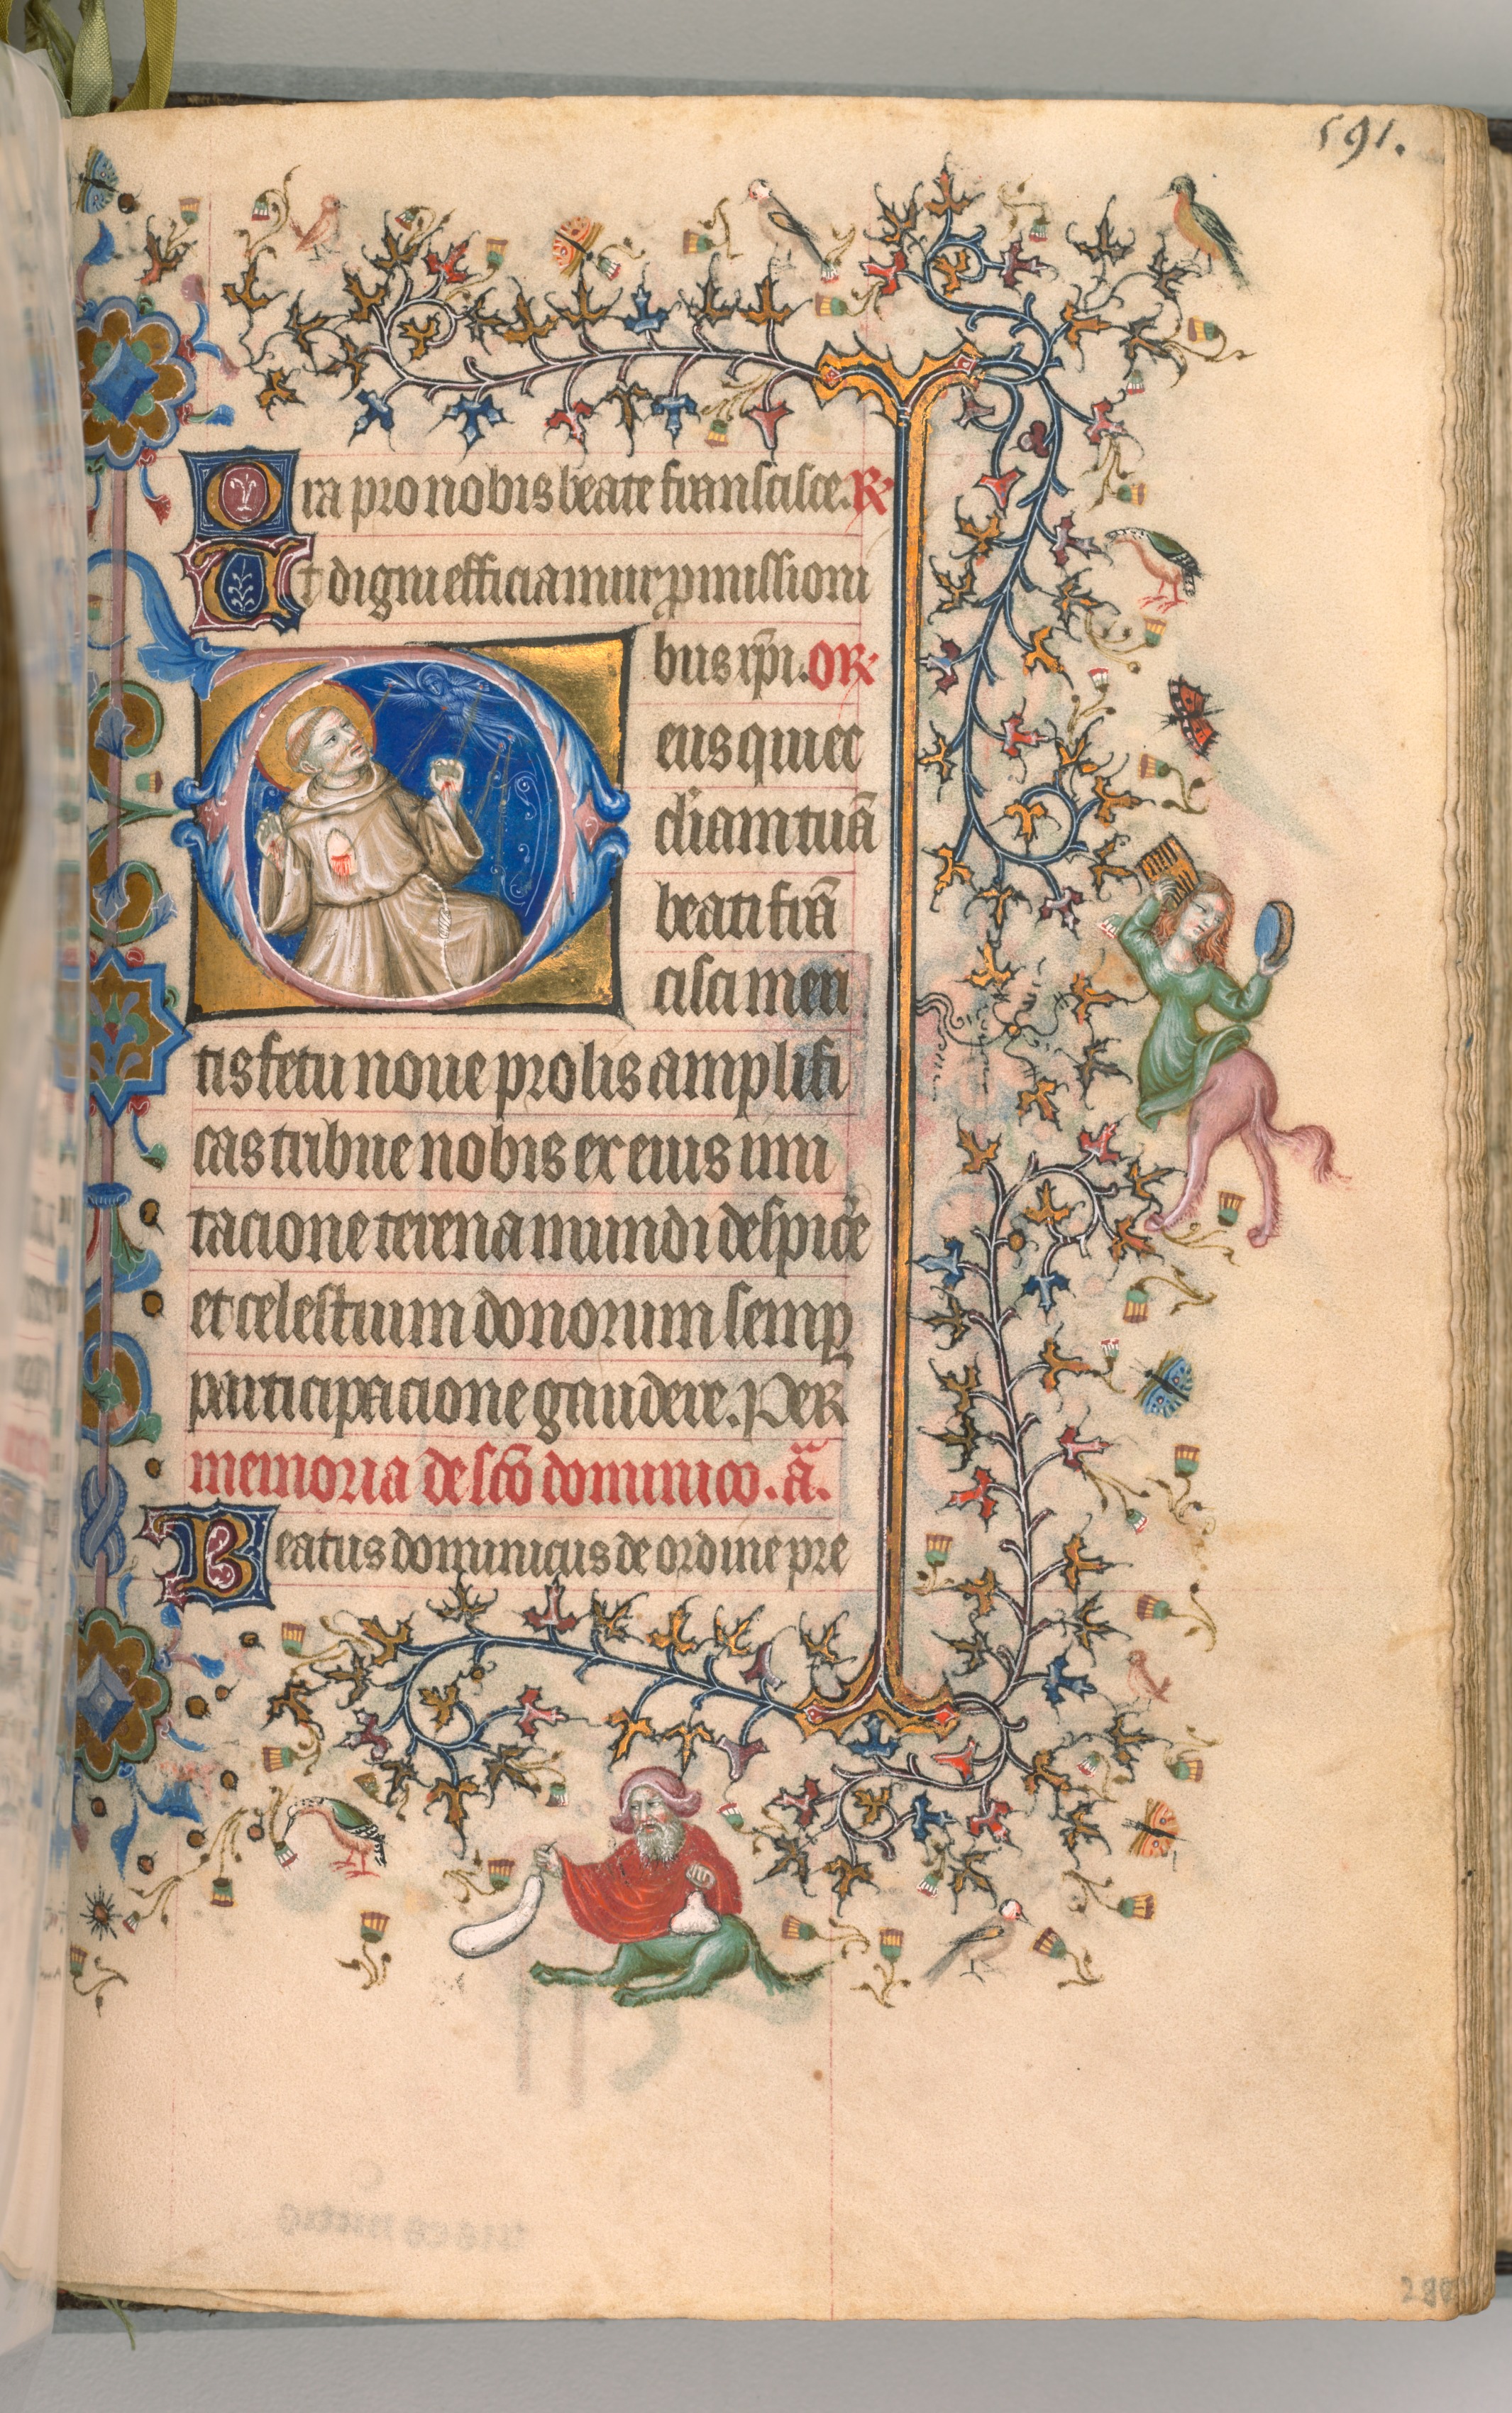 Hours of Charles the Noble, King of Navarre (1361-1425): fol. 290r, St. Francis